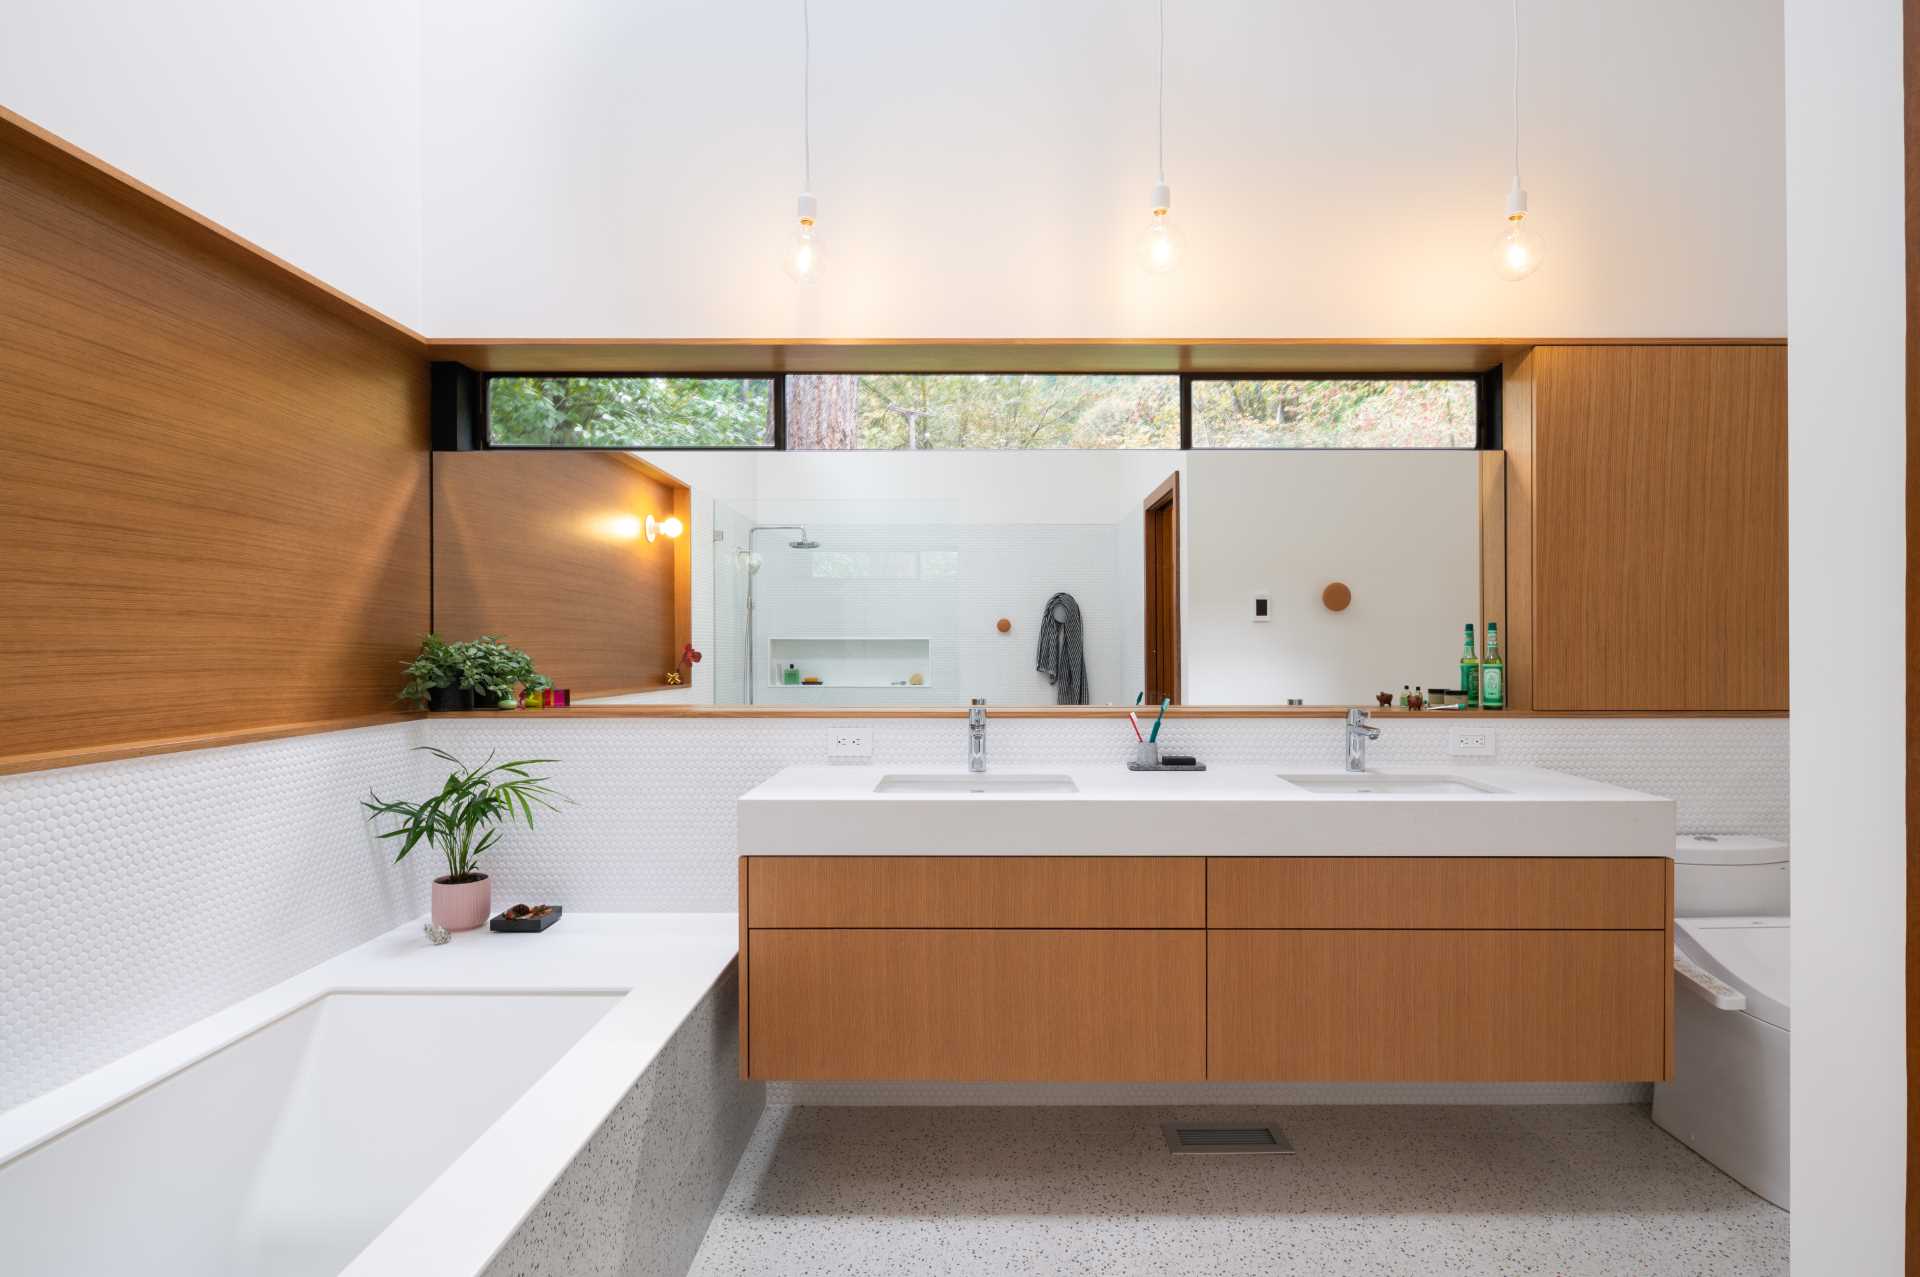 A modern bathroom with walls covered in white penny tiles, a built-in bathtub, a walk-in shower with a shelving niche, and a wrap-around wood detail to match the double vanity.